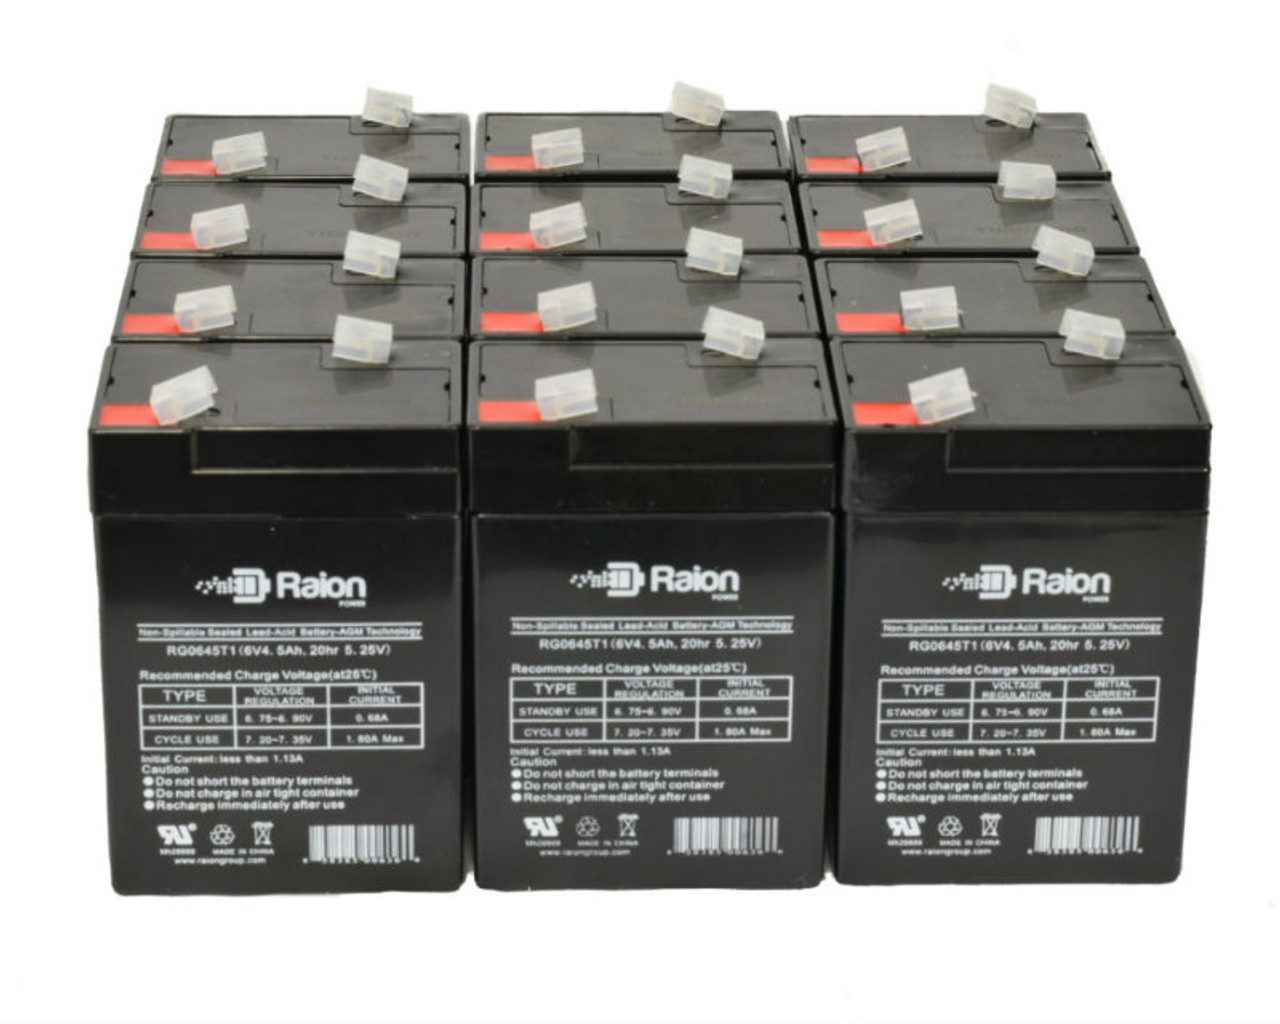 Raion Power 6V 4.5Ah Replacement Emergency Light Battery for Edwards 1624 - 12 Pack